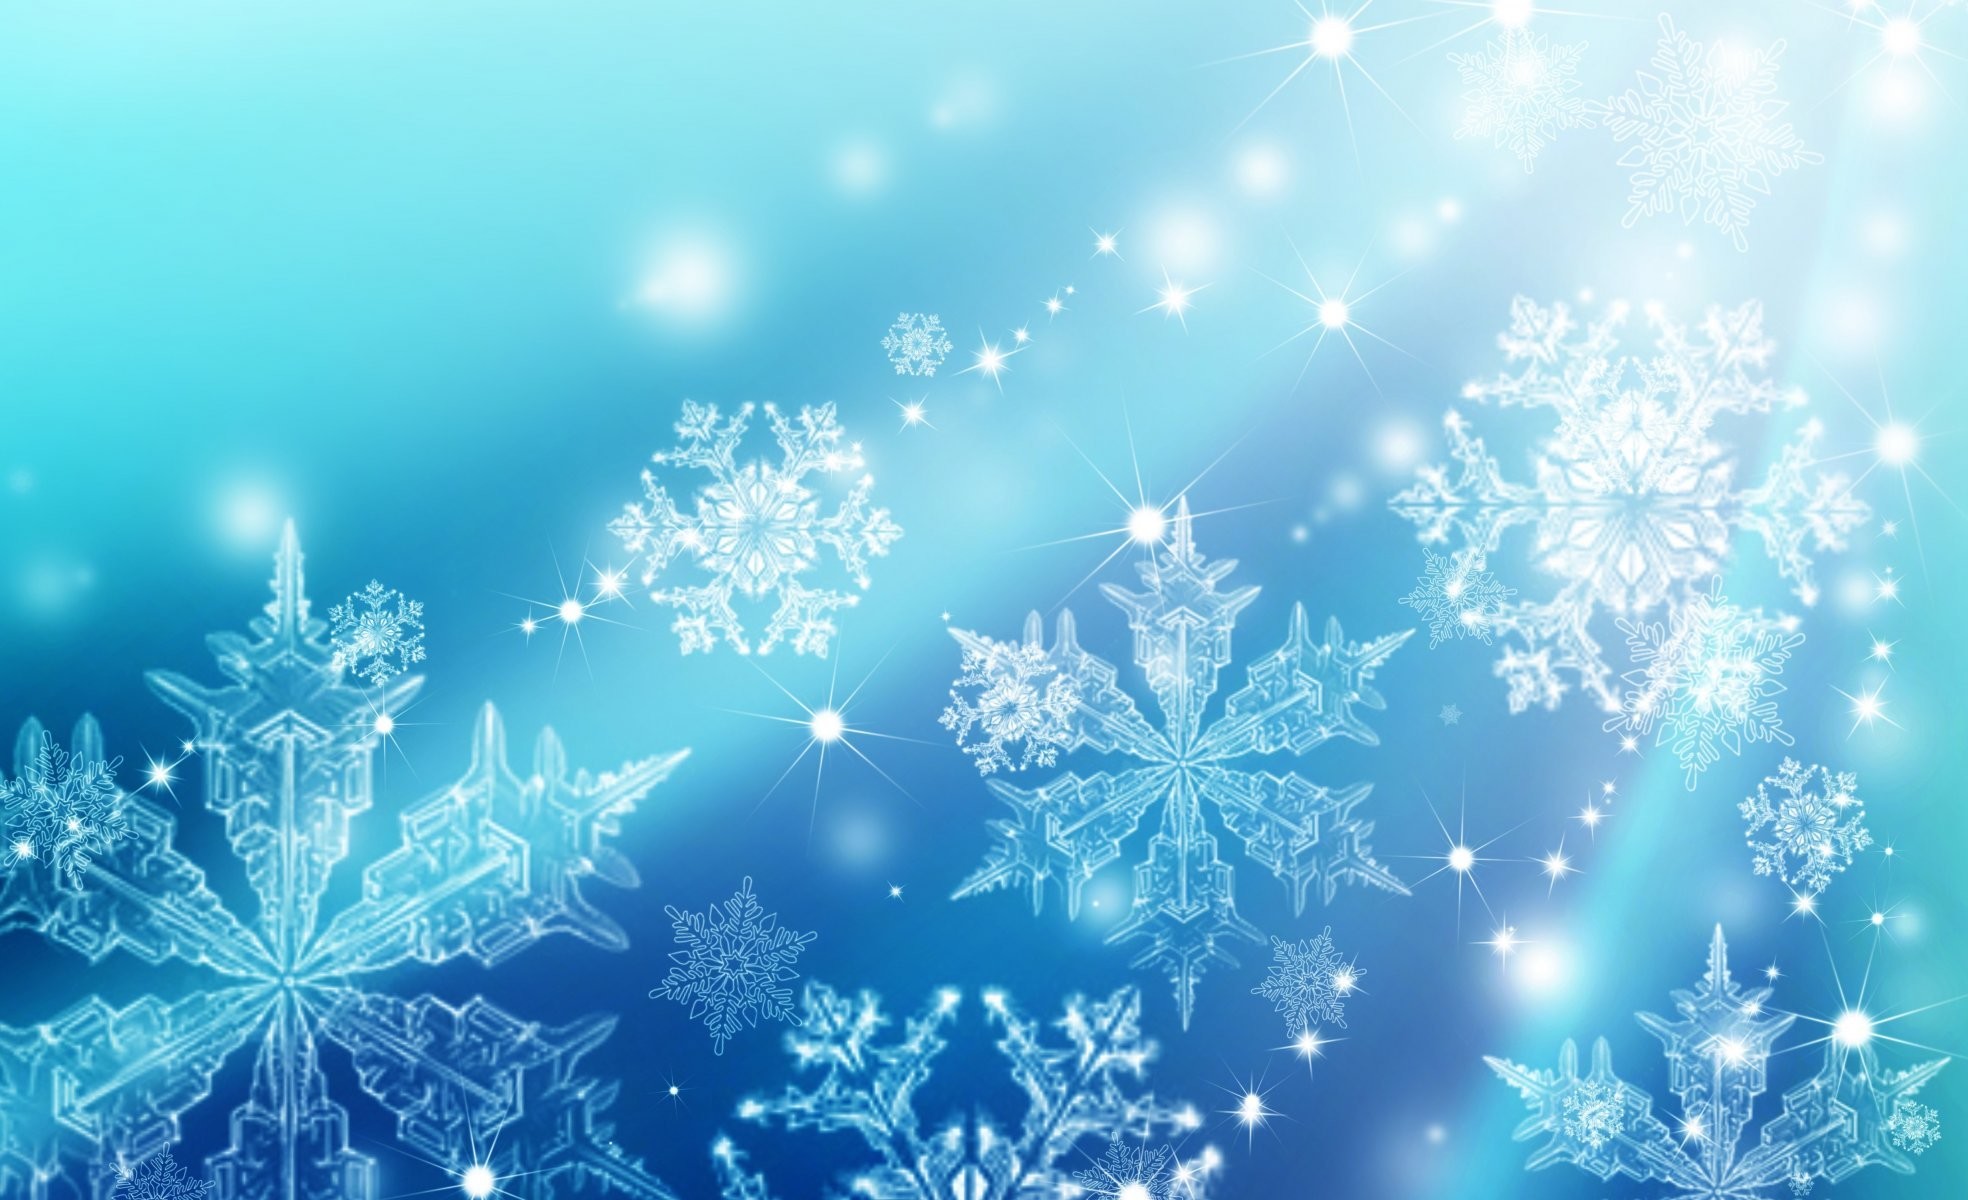 Light Blue Snowflake Background Iphone - Choose from hundreds of free